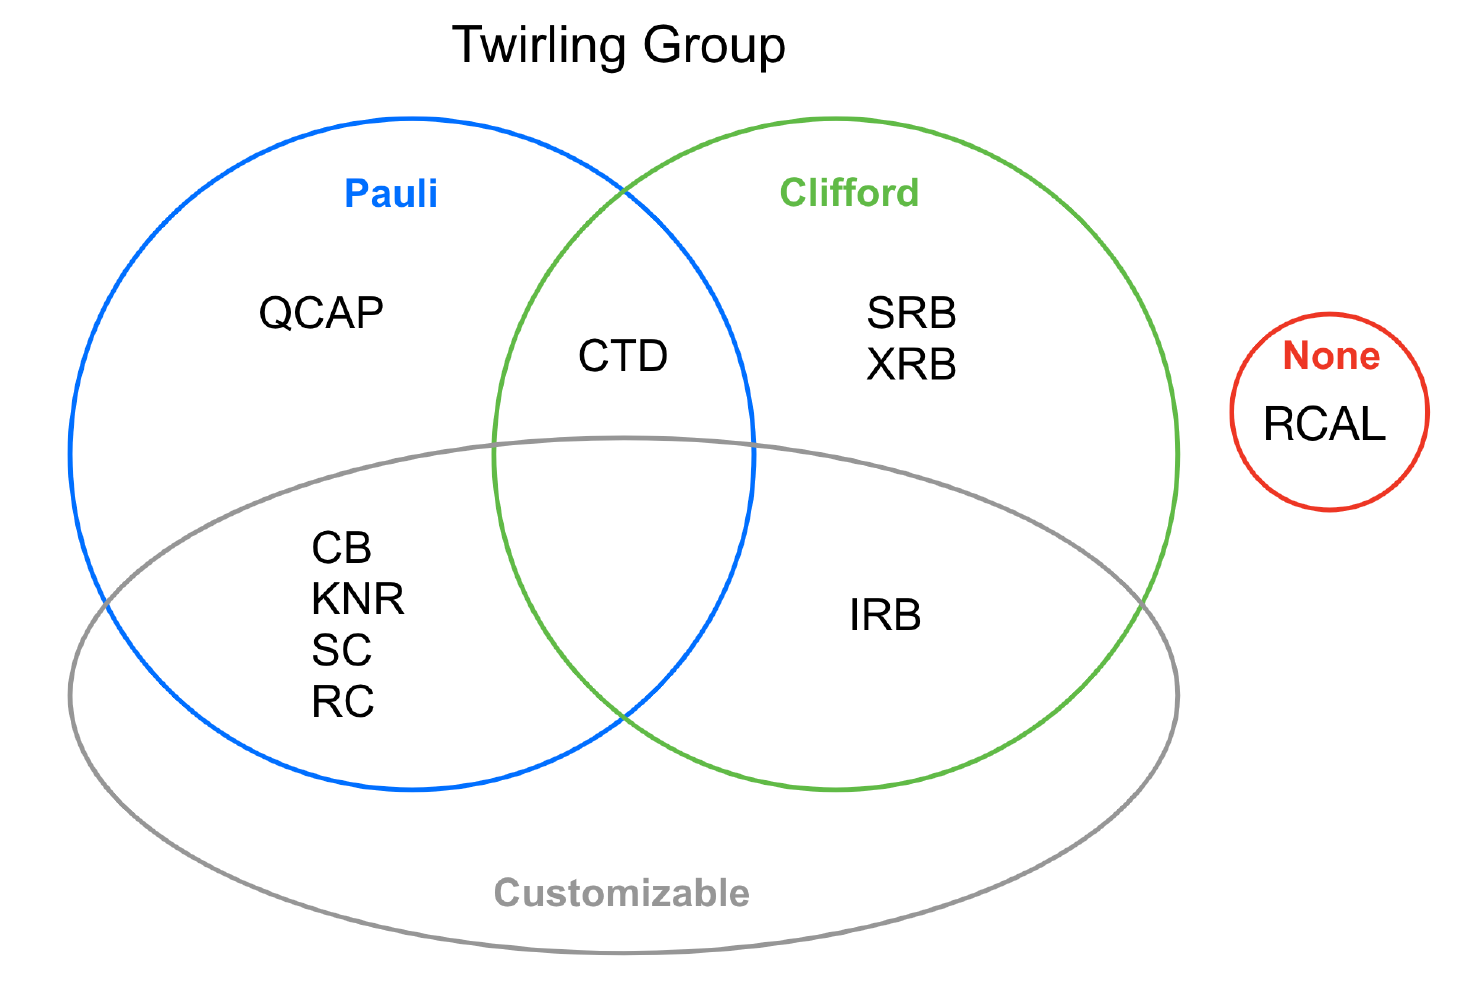 ../../_images/twirling_groups.png